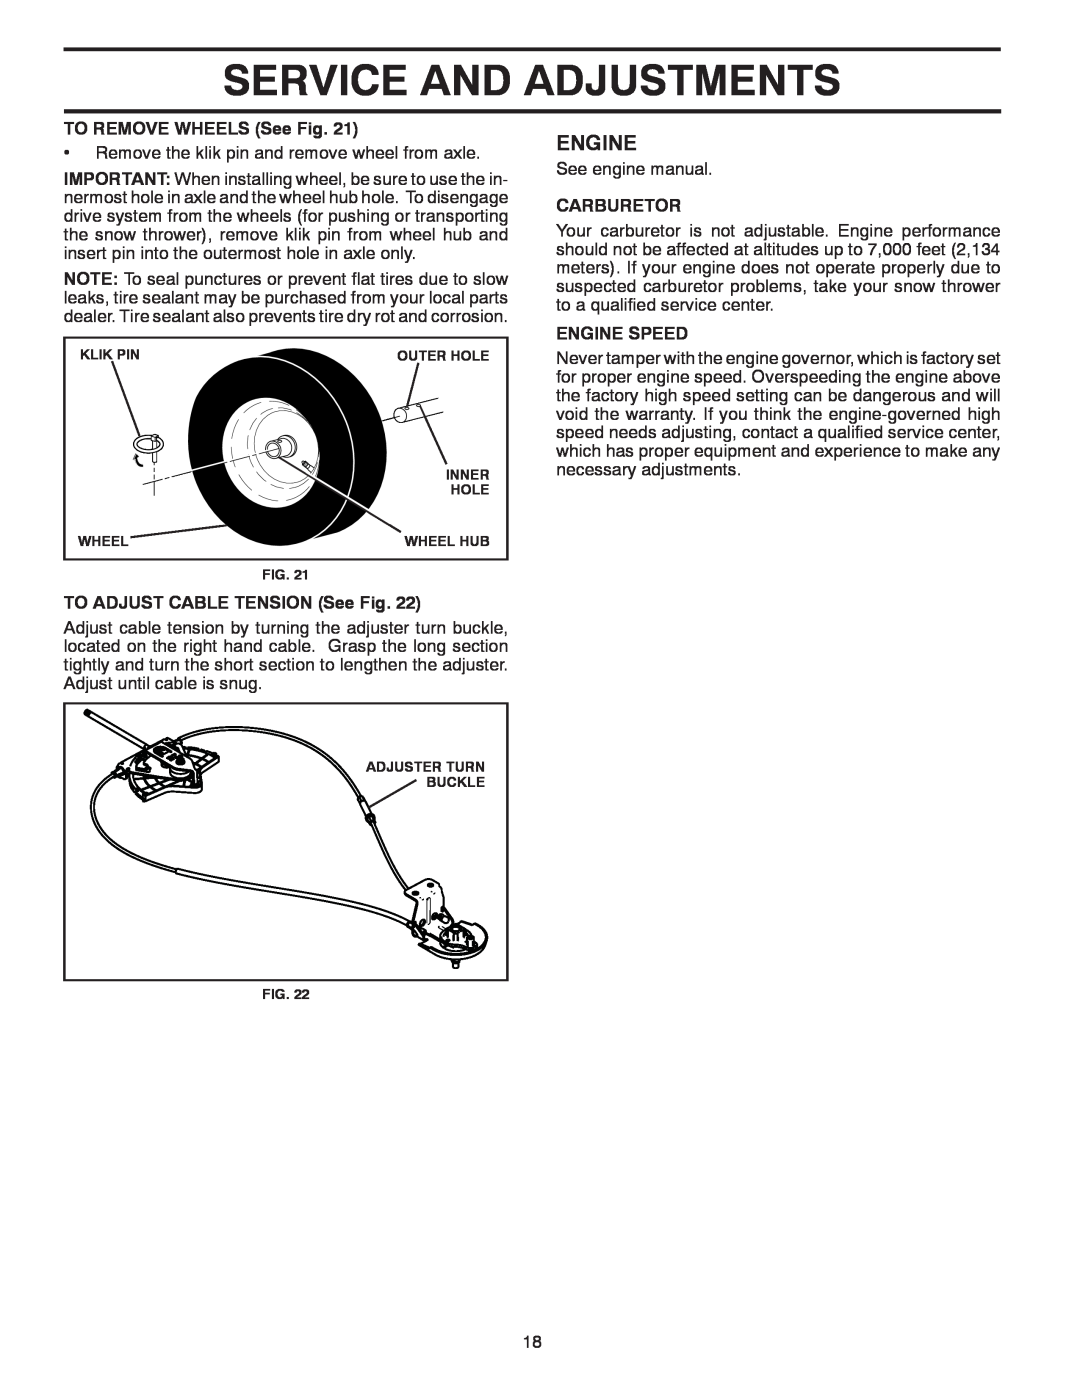 Poulan 436134 Service And Adjustments, Engine, TO REMOVE WHEELS See Fig, TO ADJUST CABLE TENSION See Fig, Carburetor 